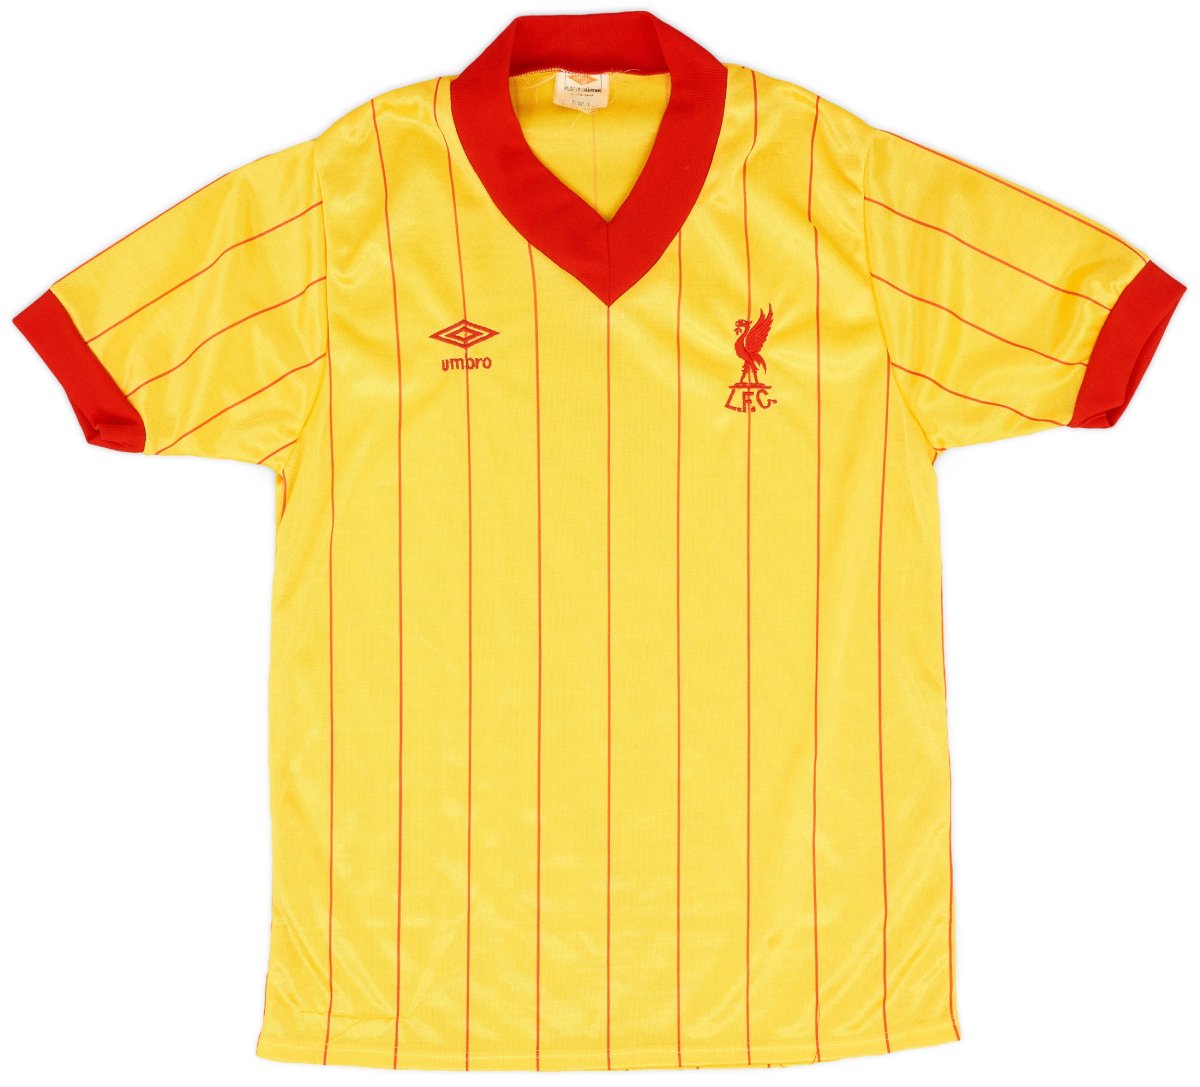 1981-84 Liverpool Away Shirt - One of the Vintage Liverpool Jerseys